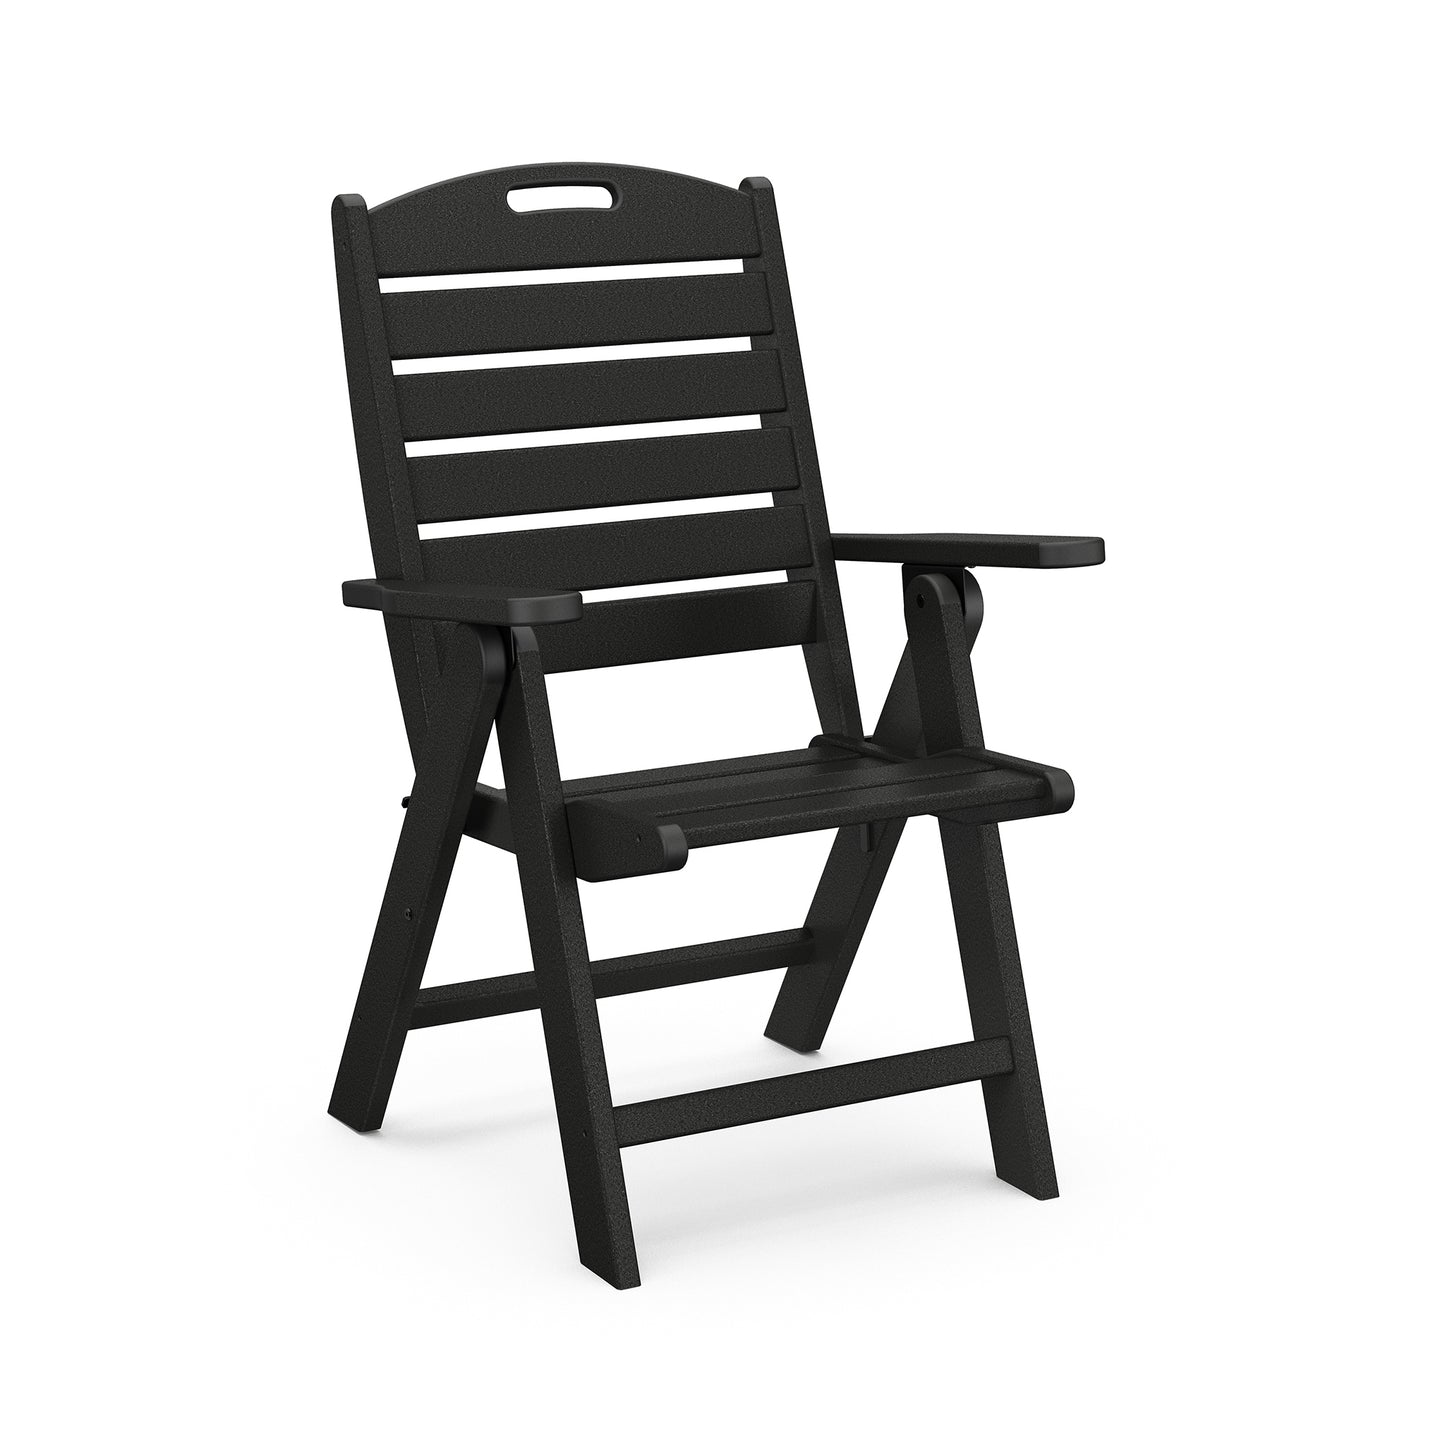 A black, foldable POLYWOOD® Nautical Highback Folding Dining Chair with armrests on a plain white background. The chair features multiple horizontal slats on the backrest and seat, crafted from